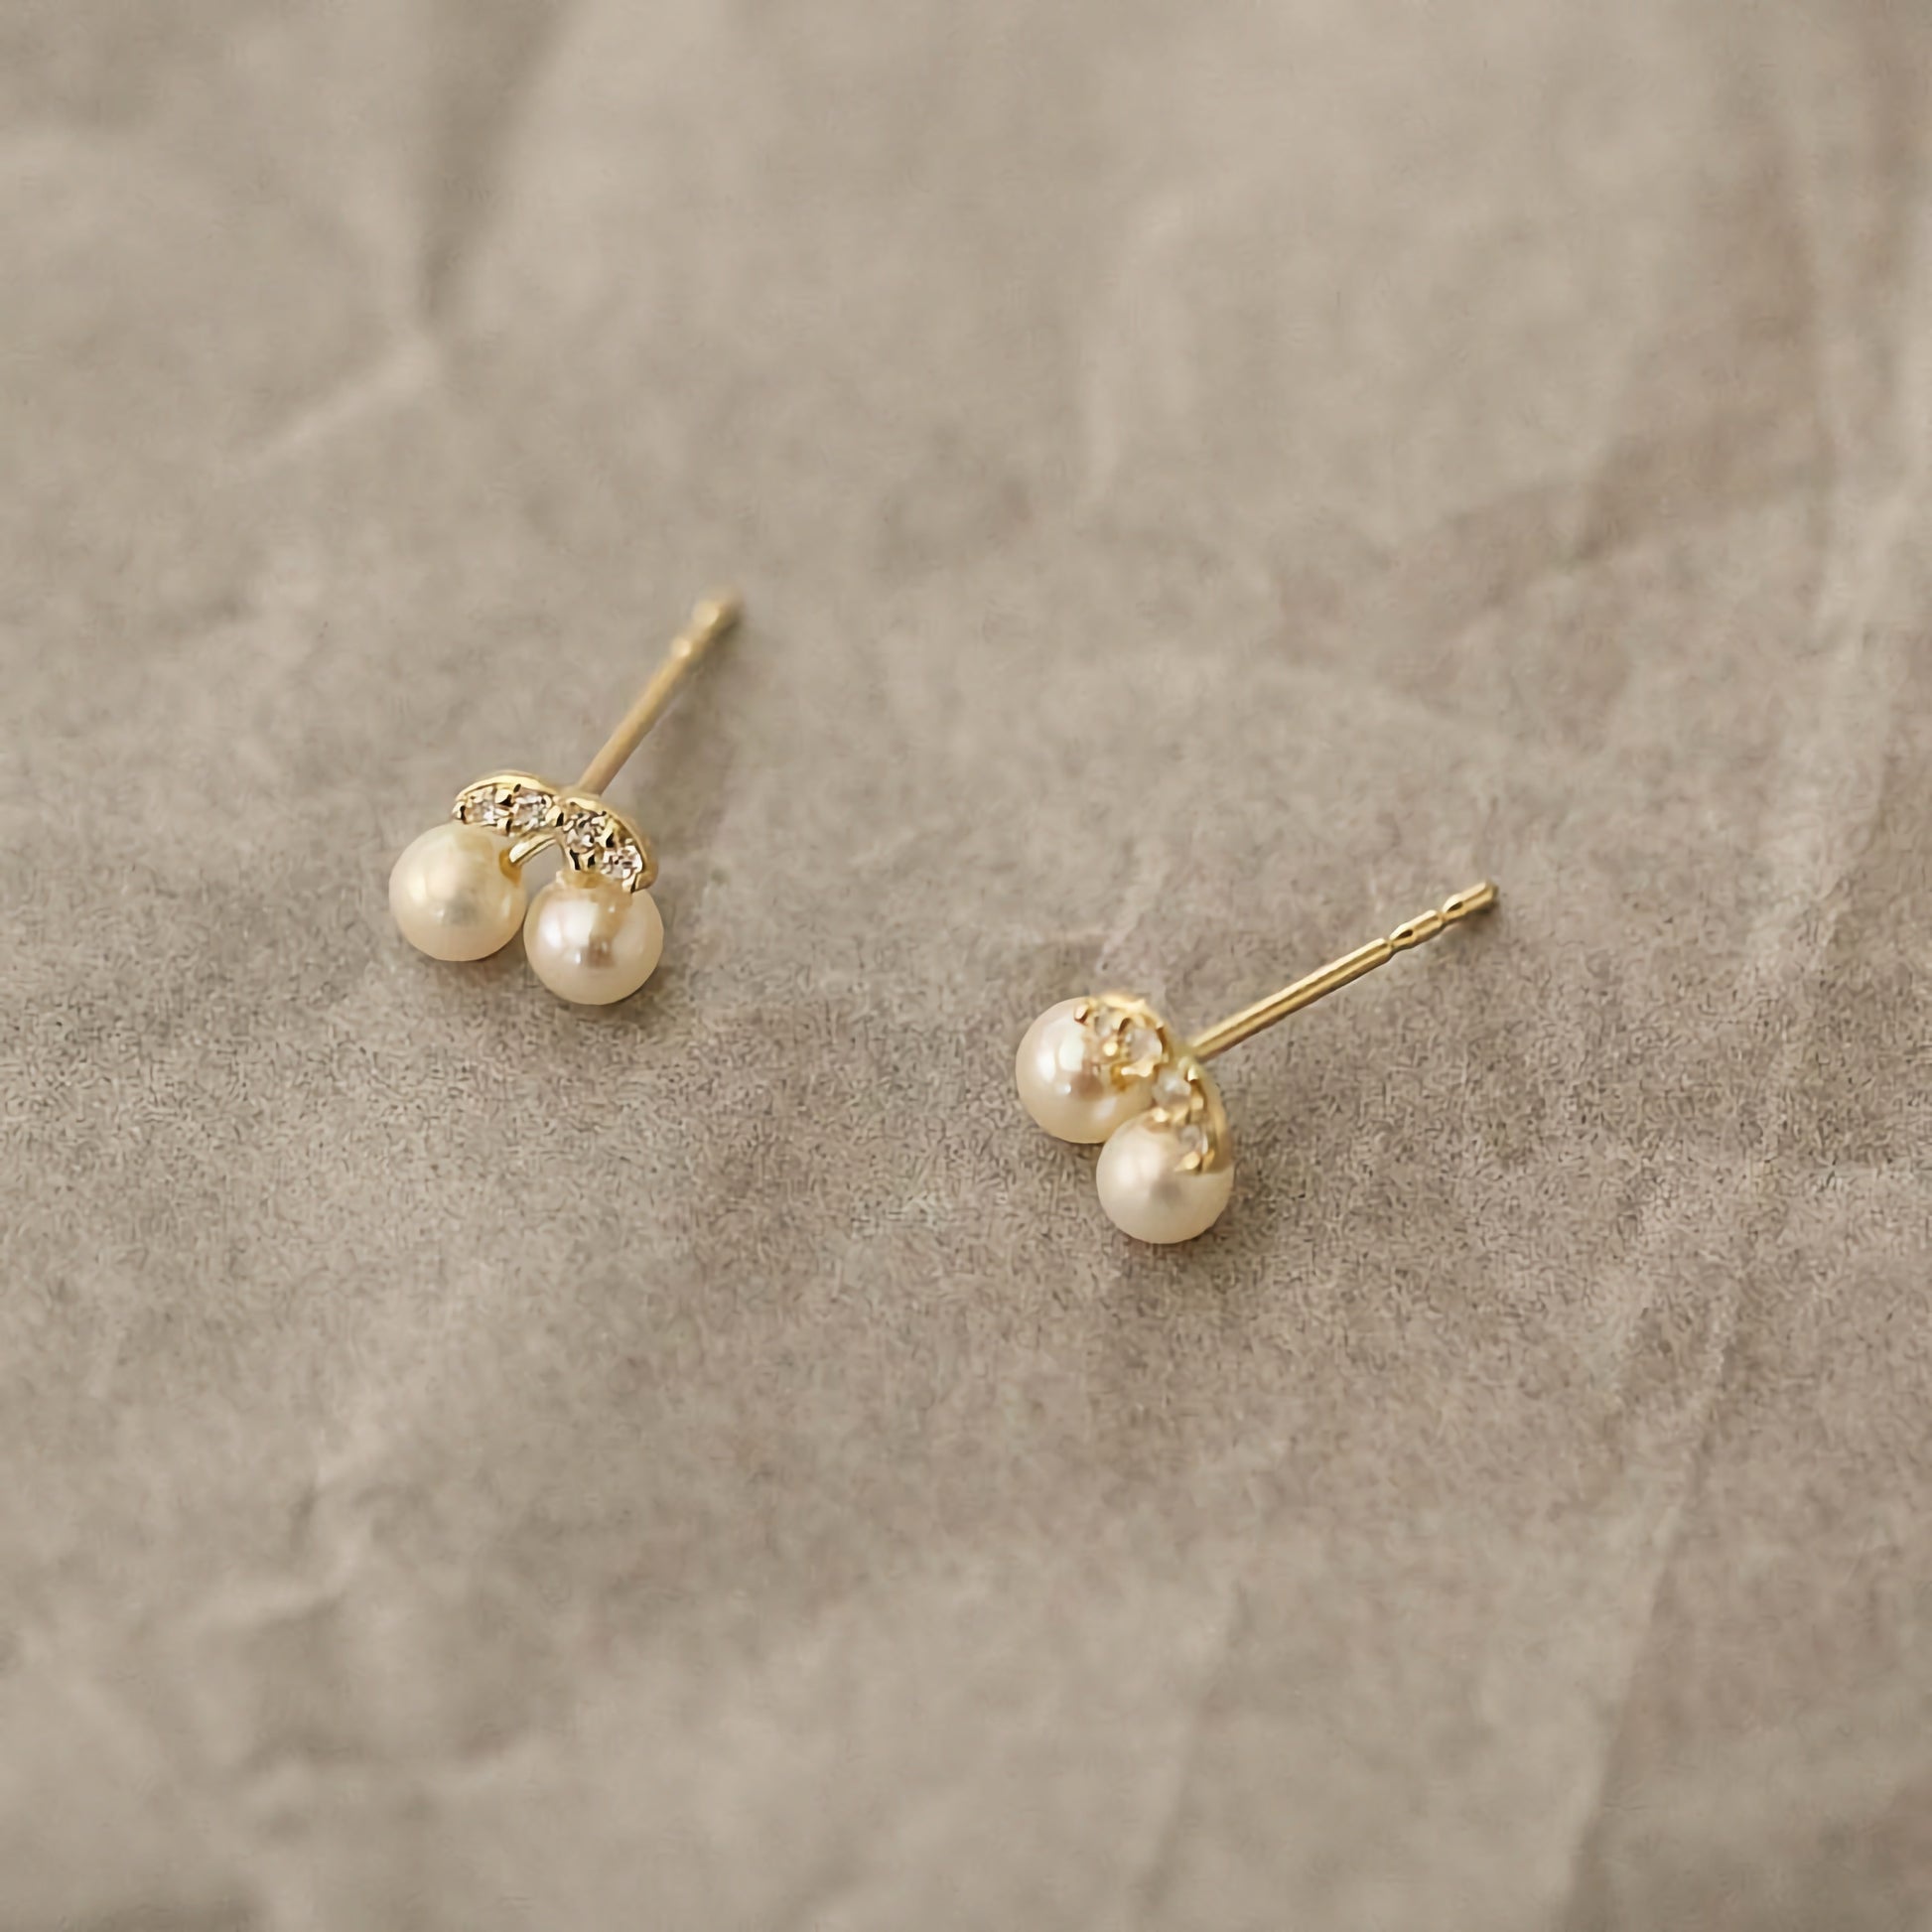 Handmade 9ct solid gold studs, creatively designed as cherries and adorned with lustrous pearls.